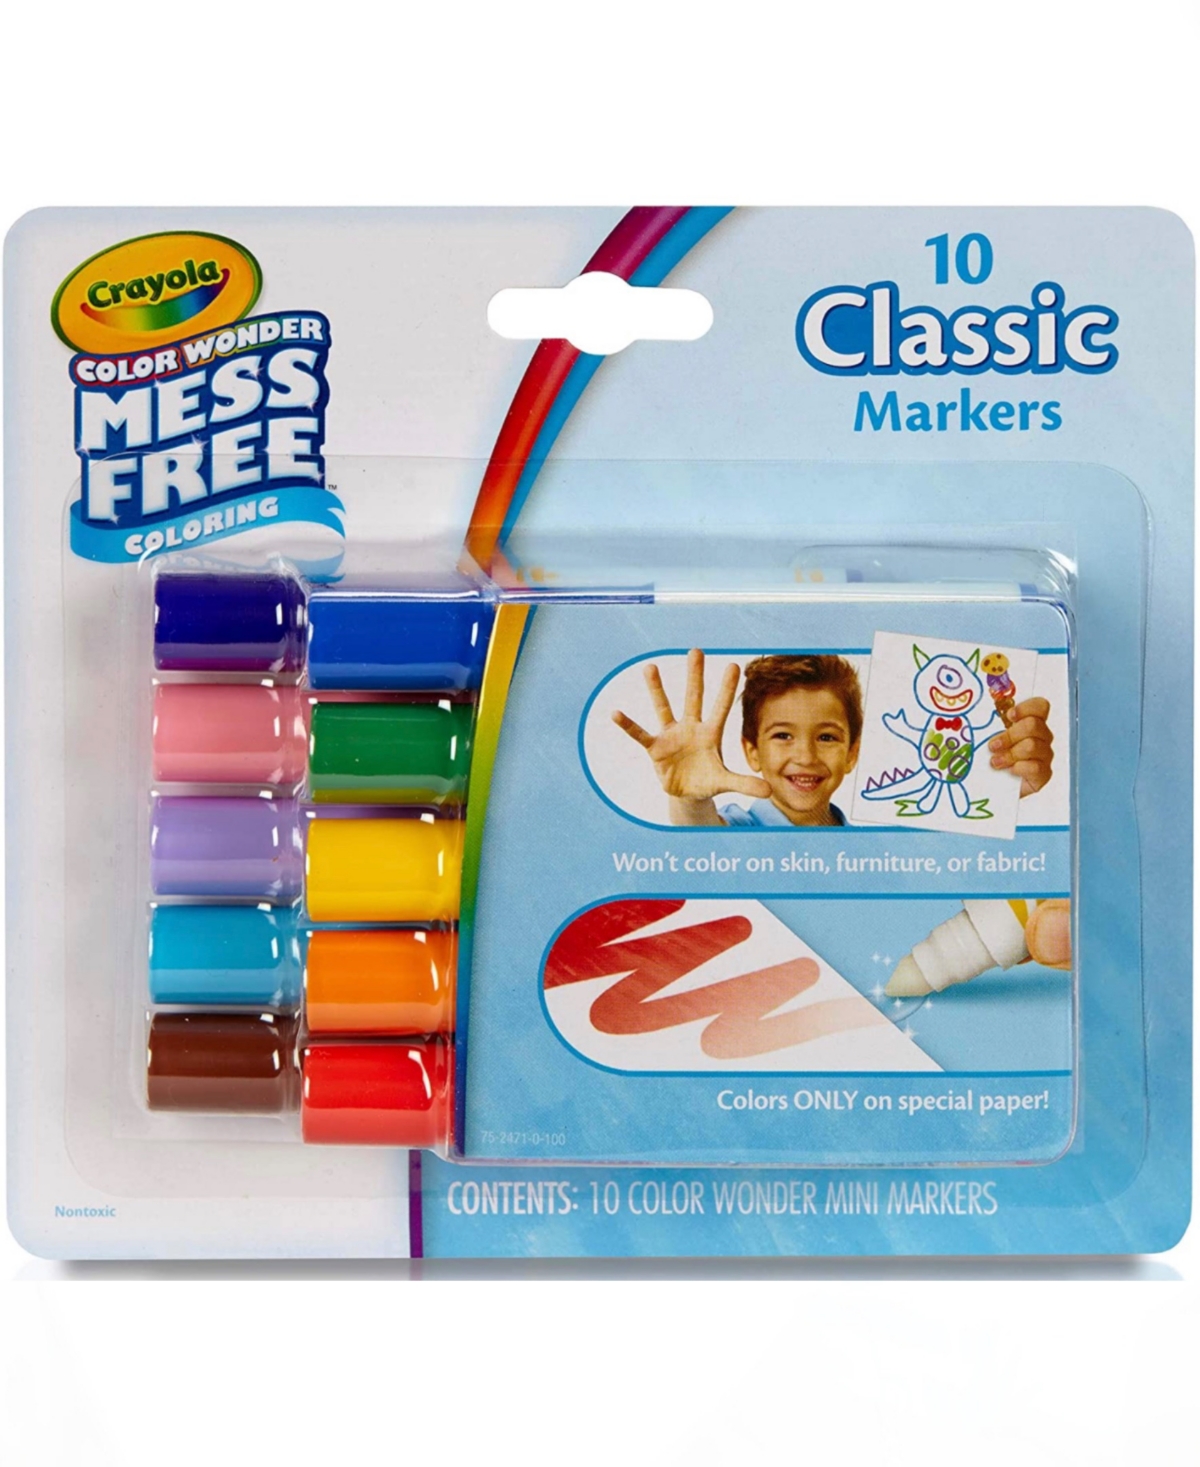 Mess Free Markers for Fold lope Coloring Pages - Multi Colored Plastic